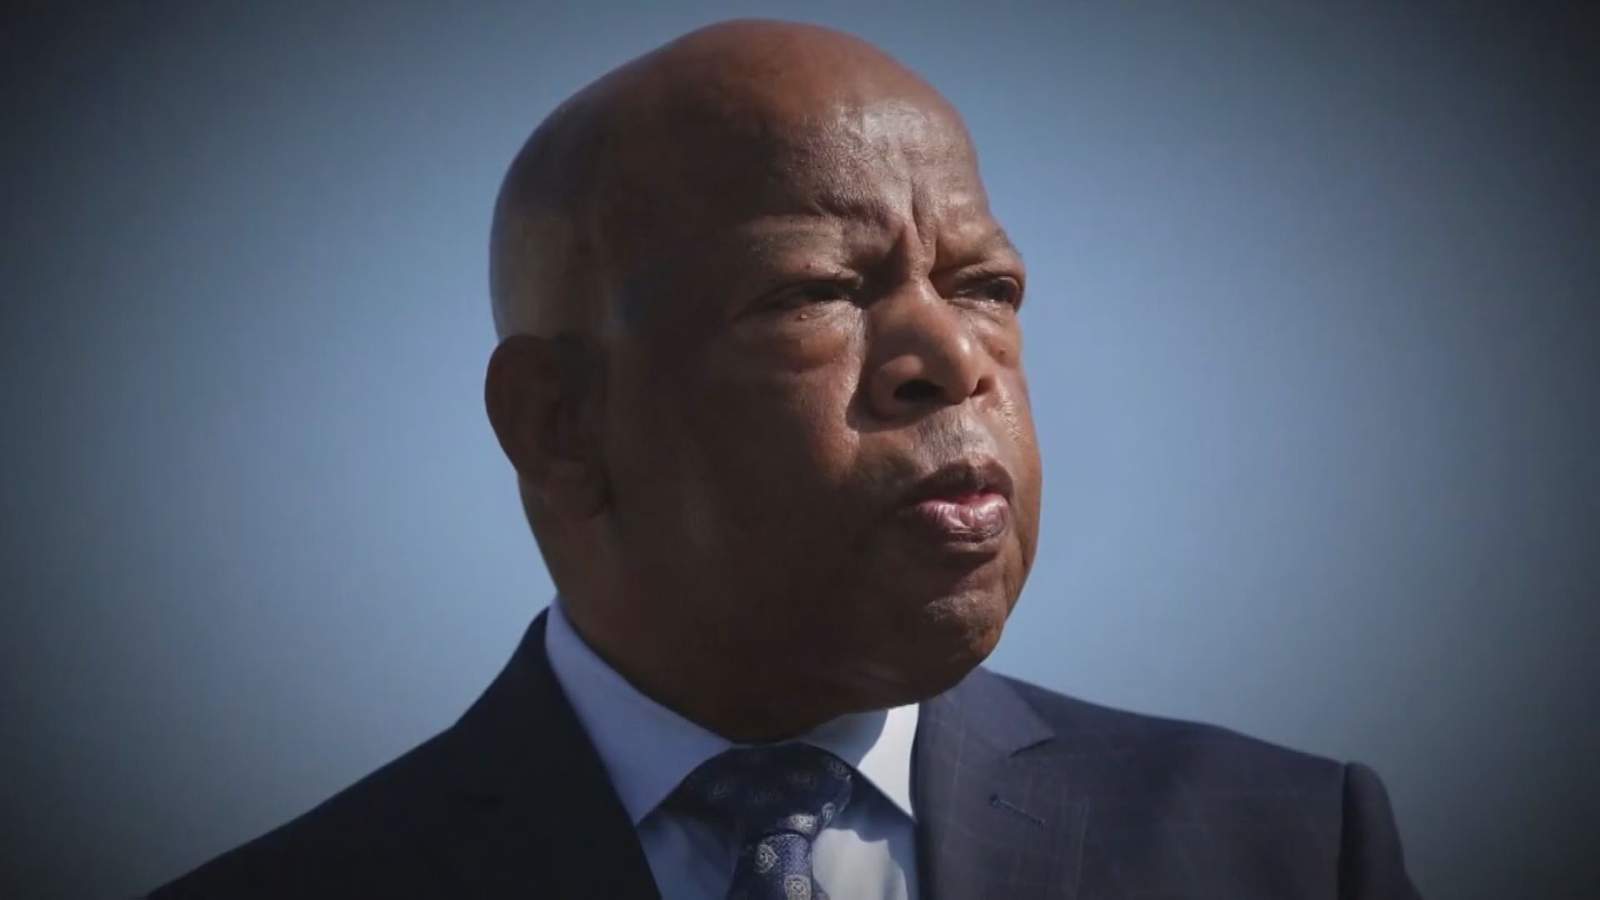 Texas leaders react to the loss of Civil Rights giant John Lewis